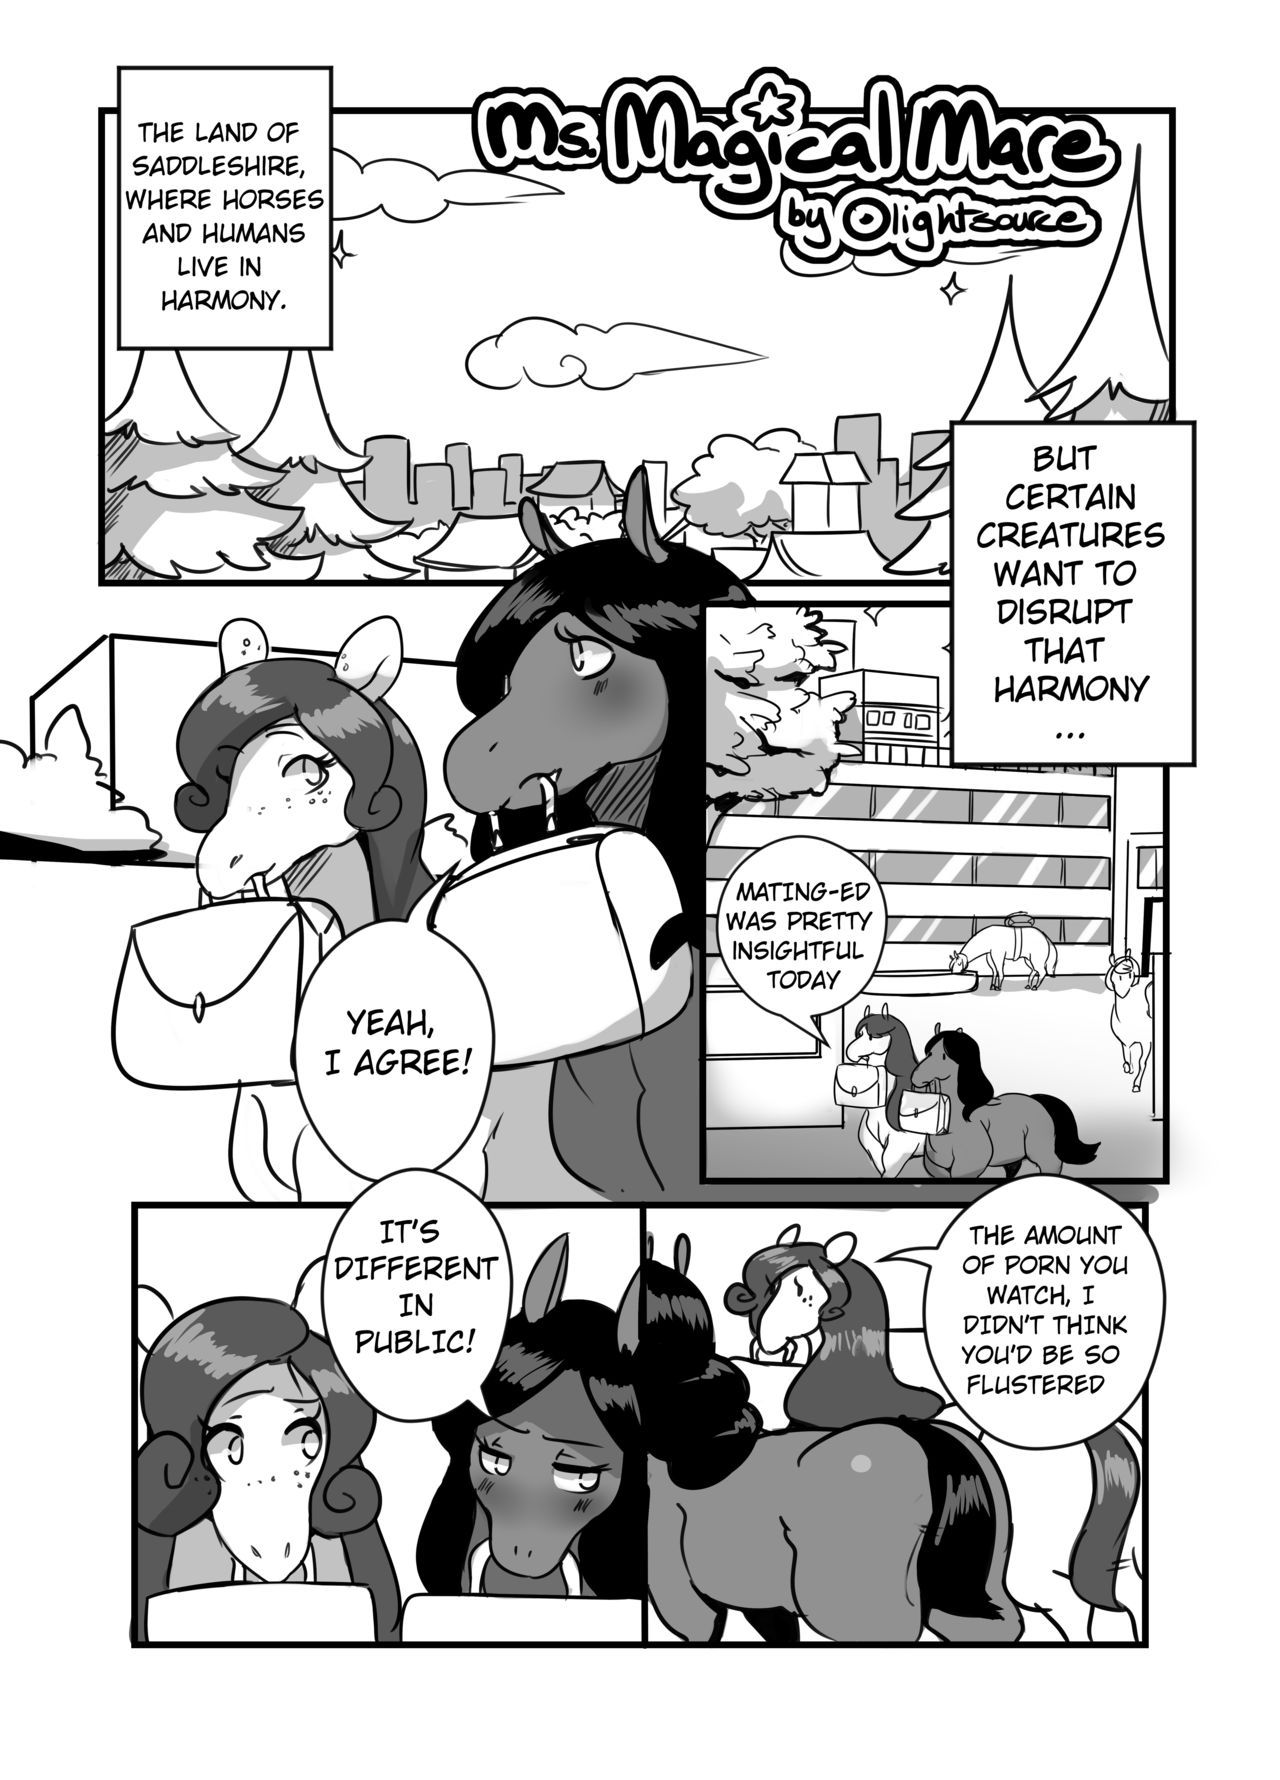 [0Lightsource] Ms. Magical Mare Chapter 1 1